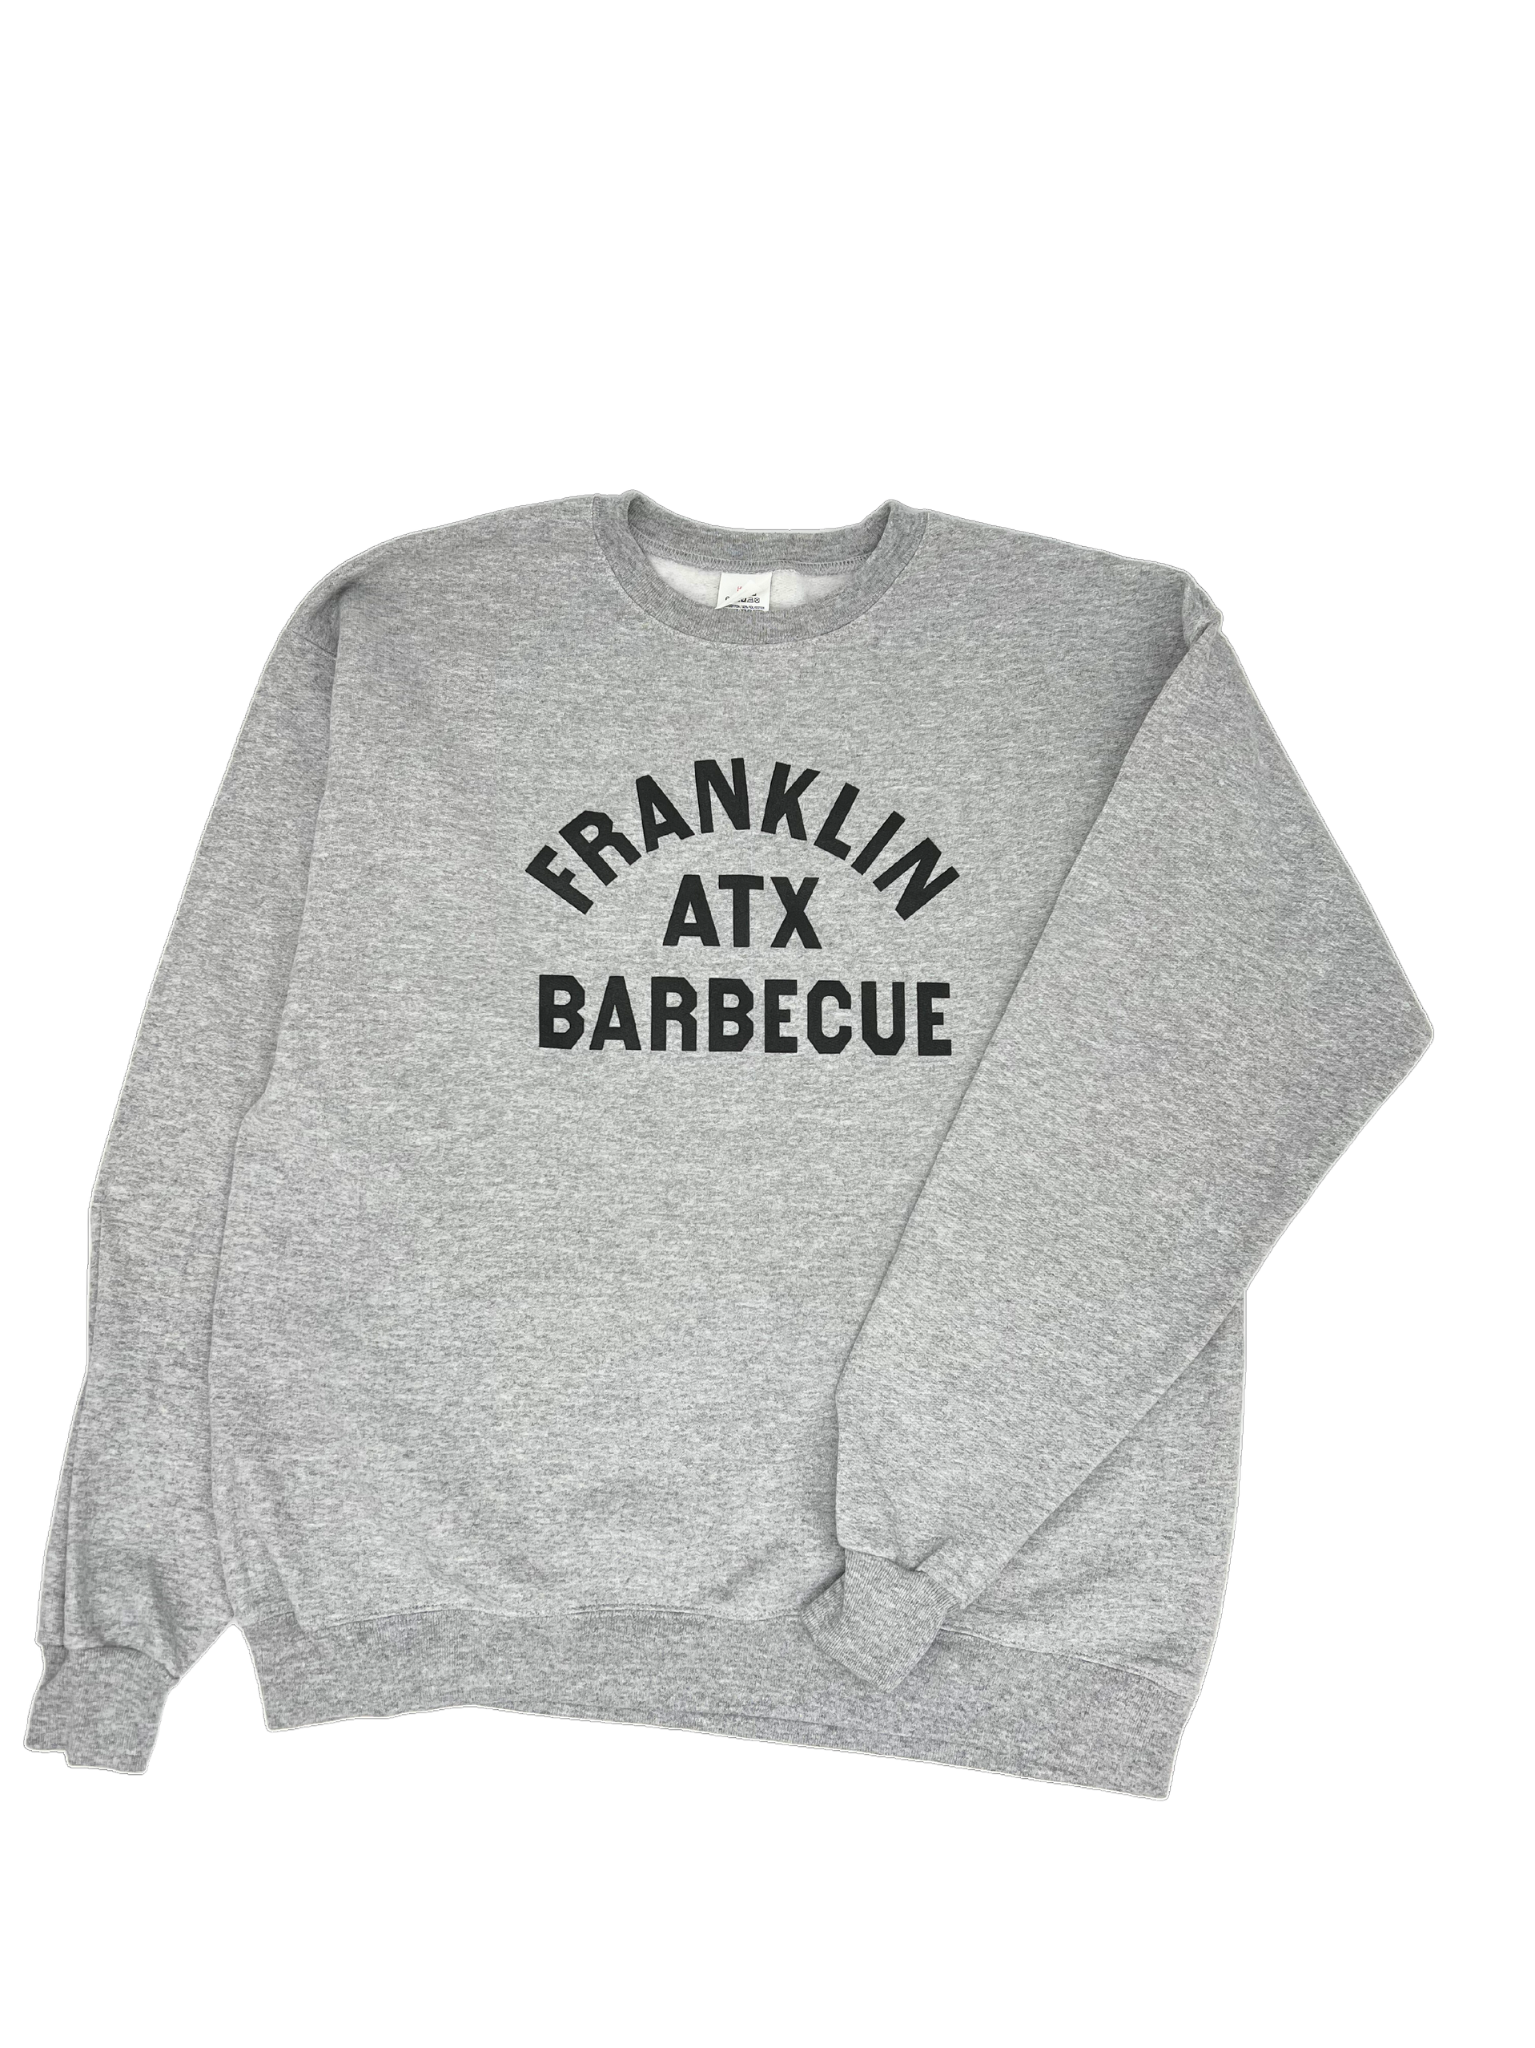 Light grey sweatshirt. In black text on it are the words "Franklin ATX Barbecue".